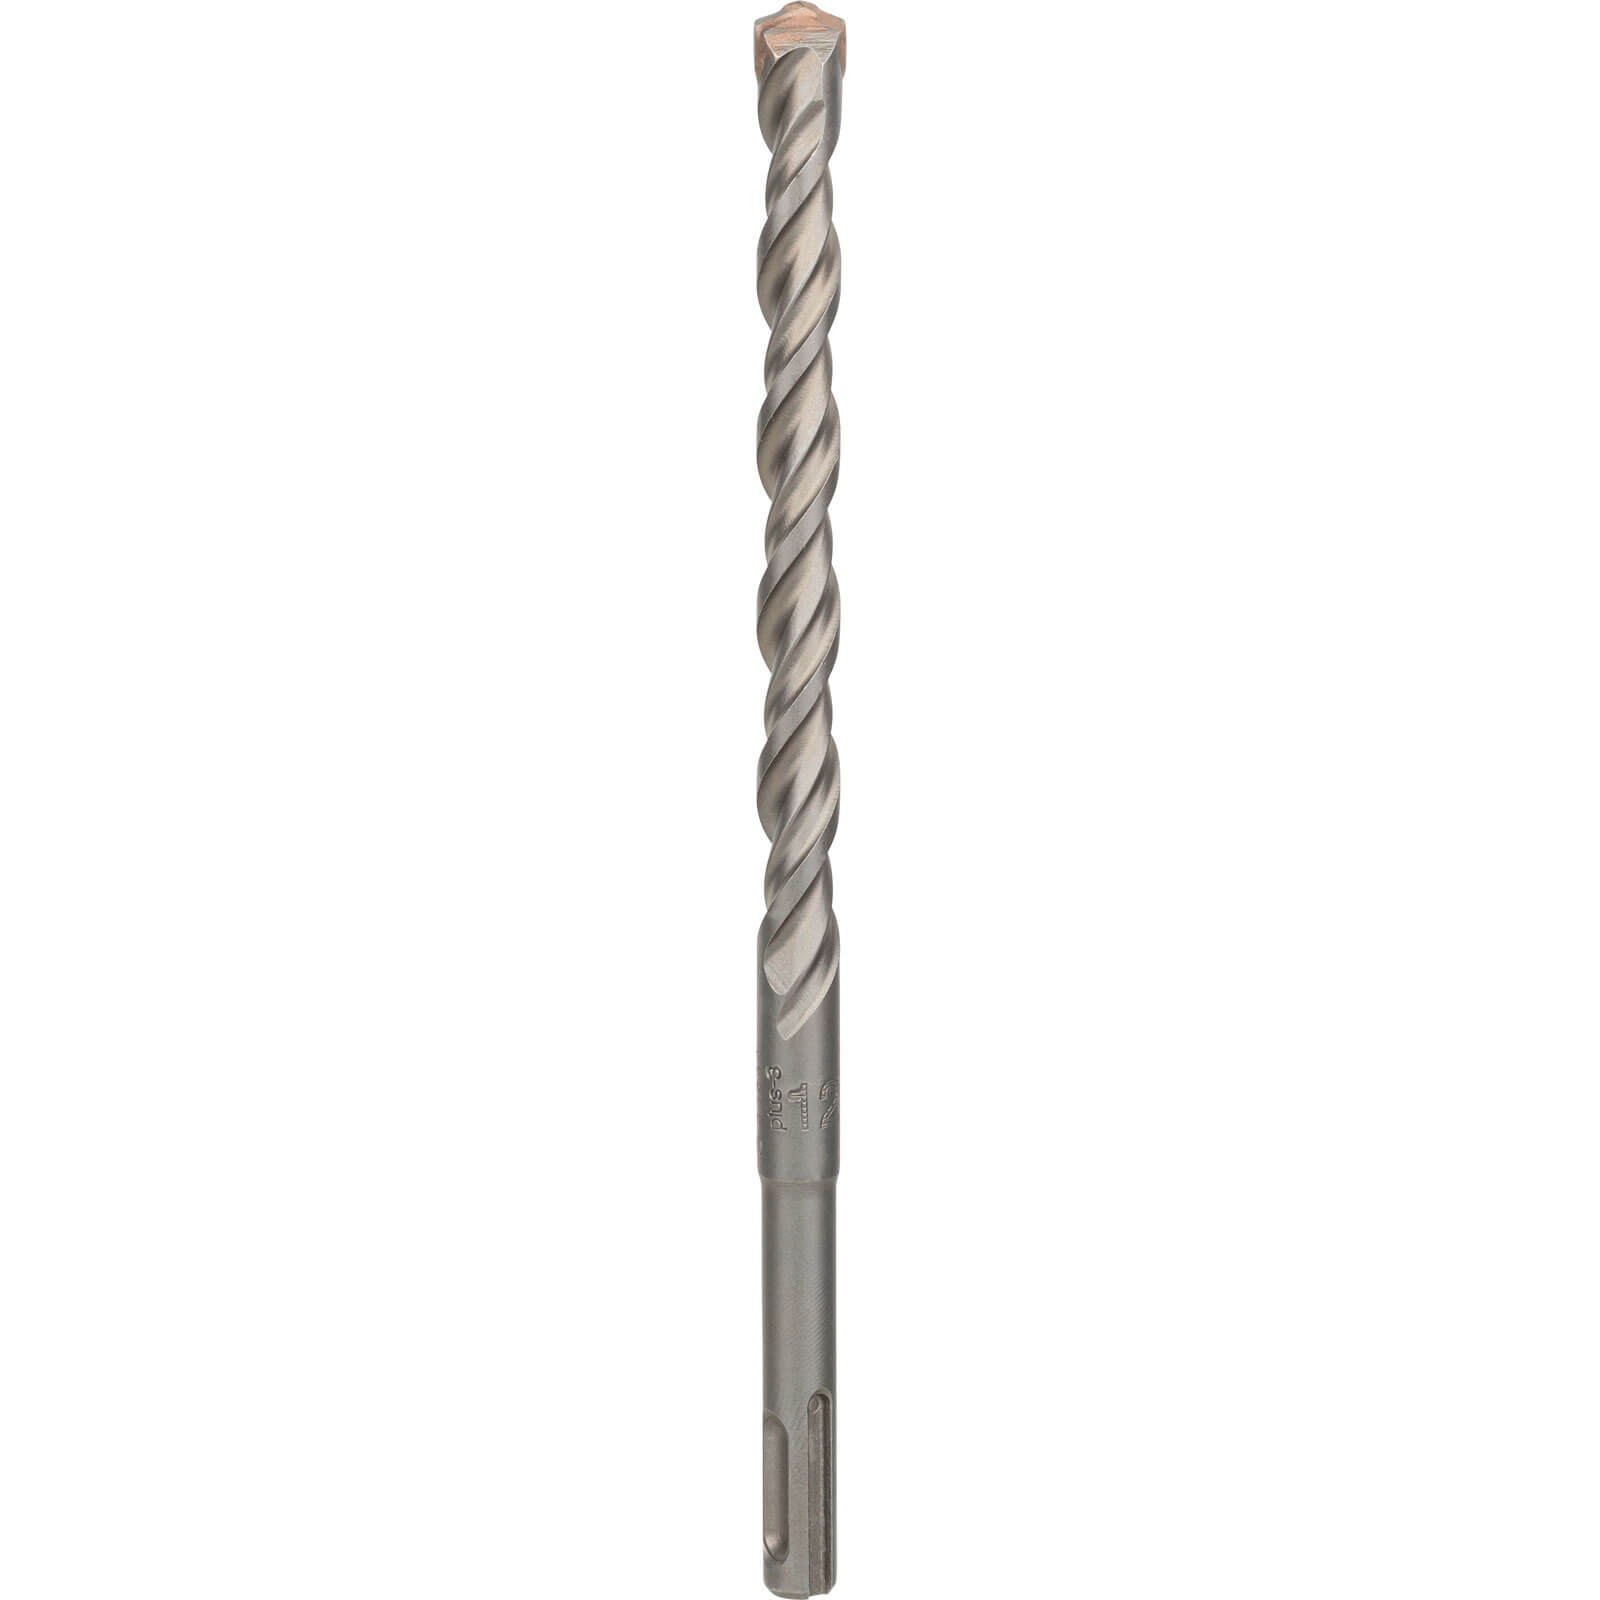 Image of Bosch Series 3 SDS Plus Masonry Drill Bit 12mm 210mm Pack of 1